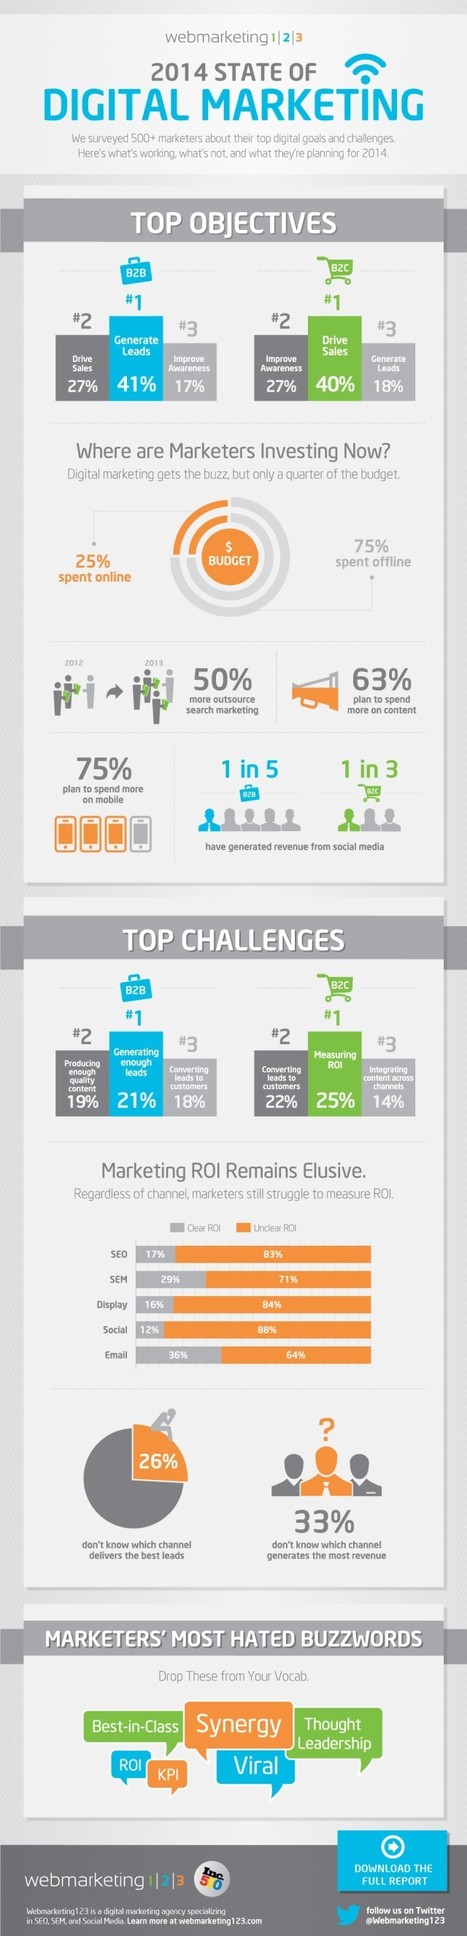 Infographic: 2014 State of Digital Marketing | MarketingHits | Scoop.it